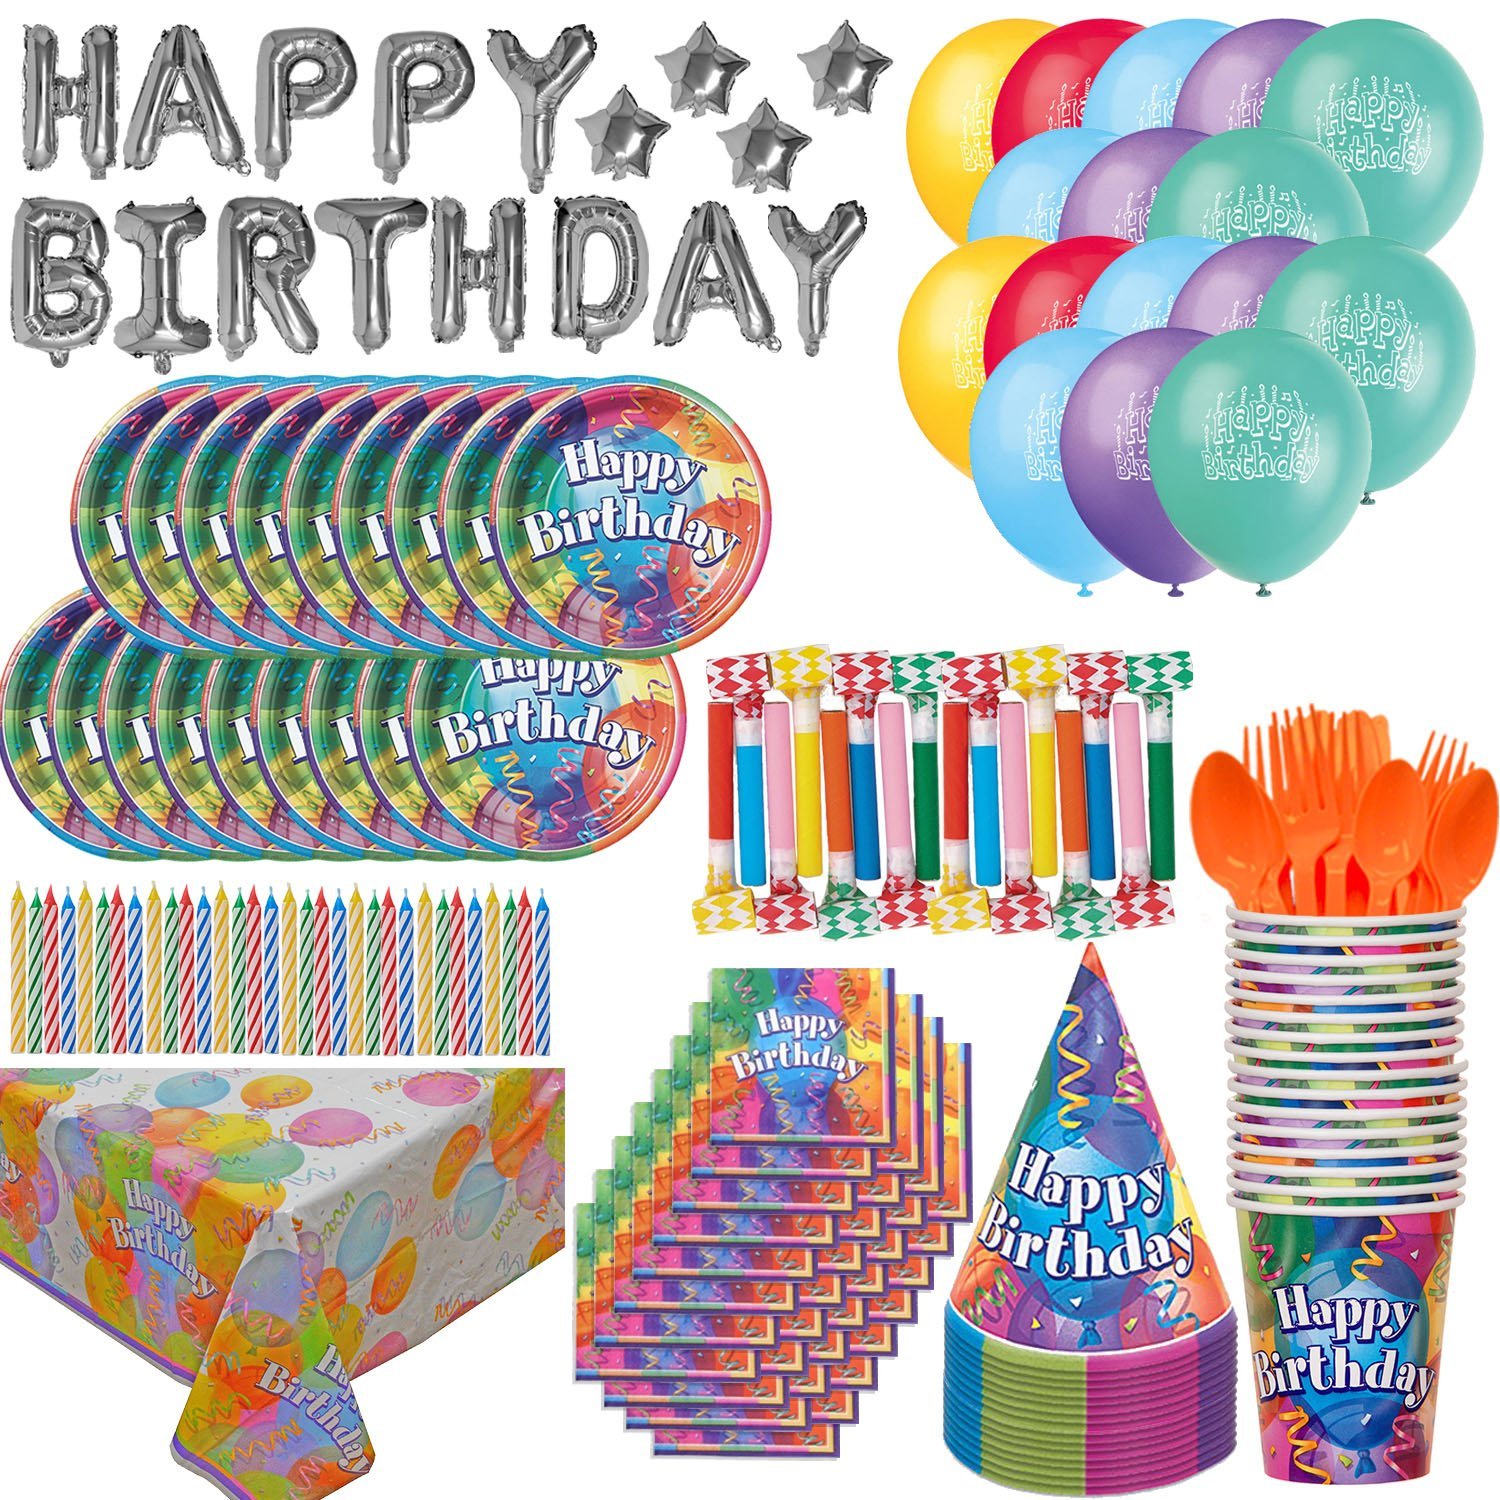 HeroFiber Birthday Party Supplies and Decorations